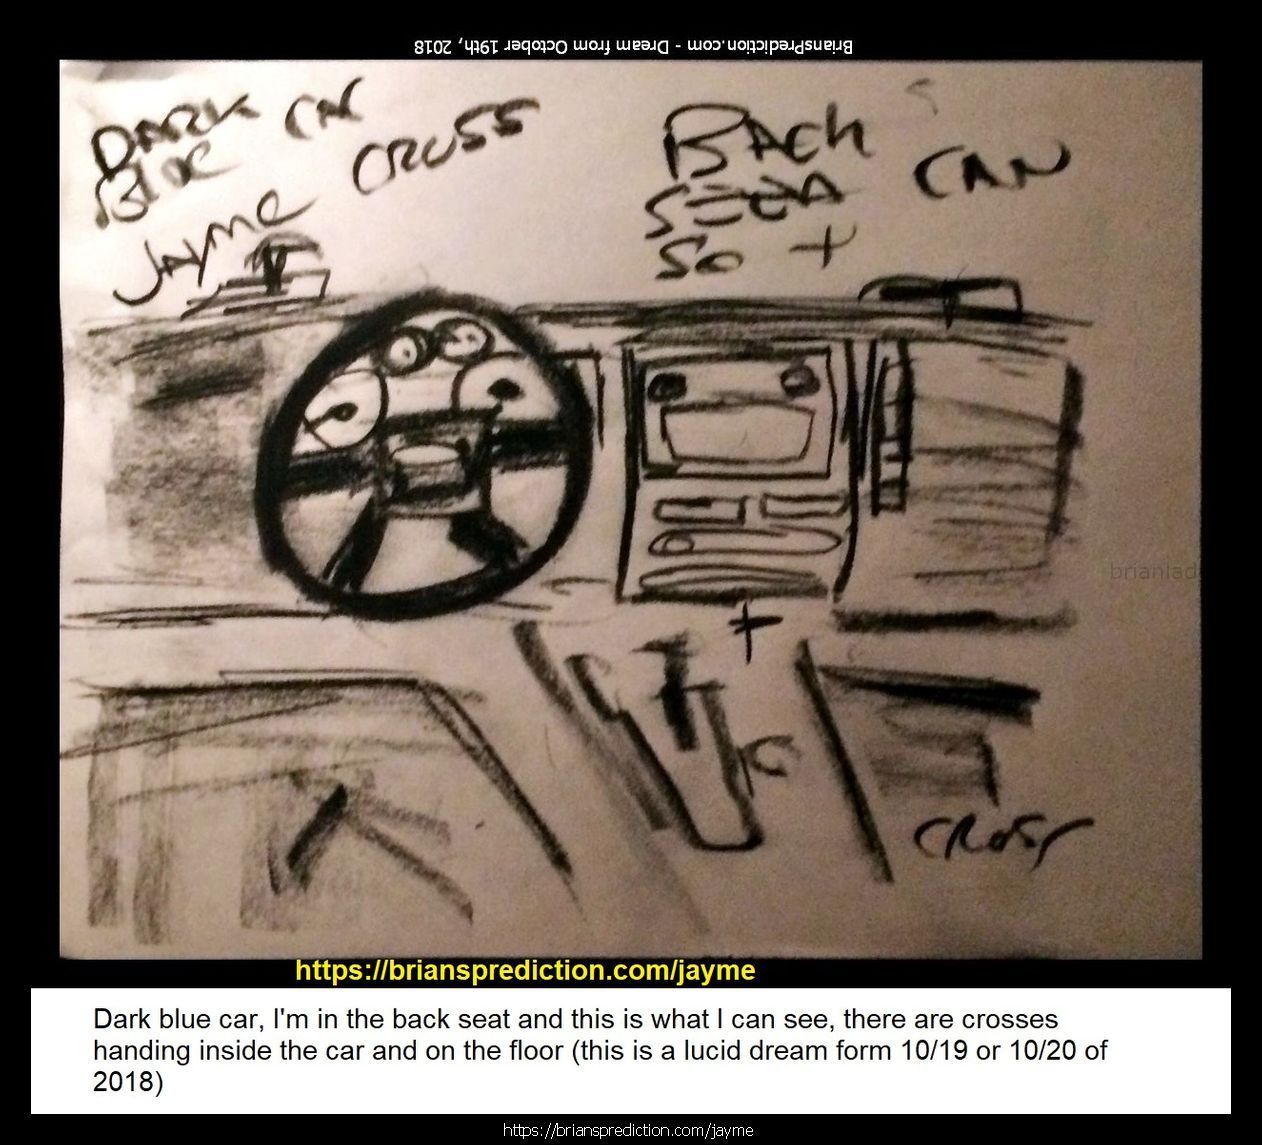 Jayme Closs Found Jayme Closs Found Psychic Brian Ladd 11212 19 October 2018 5 - 1/12/2019 These Are The Dream Drawings ...
1/12/2019 These Are The Dream Drawings Related To Missing Teen Jayme Lynn Closs The Murder Of  James Closs And Denise Closs (all From 2018)  I'M Aware Of Her Being Located On January 10th, 2019.  There Are Many Things That Do Seem To Make So Far And I Think There Is More To The Case Than Murder And Kidnapping And Lae May Be Missing Something Very Important And Involve Many More People  Will Post New Updates At   https://briansprediction.com/Jayme  Dream Text  Going To Kill Her, The Trailer Is At Cenex In Barron.  Jayme Closs, They Were In The House For 45 Minutes Before The Killings, Look Under The House Again.  Jaymee Closs Found, Go Back Look In The Crawlspace, The Phone She Used To Talk To Him Is There, Cars Unrelated, Motorcycle, Police Missed The Box?  Jayme Closs, Body Found 6 Miles From Home, January 12th, 2019, Lazy Eye, Returns To Home (this Is For January 2019 And Does Not Mean She Has Already Been Murdered)  Jaymee Closs Found, Look Again, Drove Right By The Trailer, Dallas (I Realize Dd Says Dallas, I Do Not Think This Trailer Is In Texas)  Jayme Closs Look Again, He'S Going To Kill Her On December 16th, Hania Aguila Killed December 25th, Numbers, Church, Trailer (may Not Be The Right Translation Of Last Nights Dream But I Will Be Posting Additional Dreams On These 2 Cases In A Few Day  Trailer, He Took Her Here, Hania Noelia Aguilar Found, Fire Tower, 27, More Numbers.  He'S Taking Another Girl, Trailer, December 2018  Mollie Tibbits Is Still Alive After Killing, Trailer, 27, 27, 57 Feet, Fire Tower, He Going To Take Another Girl - Always 2. I'M Aware She Is Not Alive And I'M Not Sure What This Means.  Hania Aguilar Case May Be Related To The Jayme Closs Case An Could Explain Why I'M Having So Much Difficulty Finding This Trailer.  Jayme Closs Is Still Alive In Trailer, Lacross Thee Dreams Are From November 11th - 13th 2018 And Are From My Hospital Room In Port Saint Lucie Florida. Please Visit My Site News For More Details On This Case At   https://briansprediction.com/News.Php  Jayme Closs, Police Are Withholding This Item, Someone Knows When She Had This, Drugs (meth) Are Being Shipped In And Out Of Turkey Plant In The Bird'S Cavities, Road Dogs Biker Gang.  Box In Truck, Colton Treu, Was In Rice Lake, Eau Claire, Refrigerated Trailer, Knows Where Jayme Closs Is?  The Man At Cameron? Who Will Go To James Closs'S Funeral Is The Same Man Who Has Jayme Closs  10/24/2018 From All Thee Dream Drawings (dd's) This Is The Trailer Jayme Closs Is Being Held In. Dd States That Le Already Searched The Area But Did Not Break The Lock, The Man Who Took Jayme Has The Only Key.  2018 2 Psychic Prediction.Jpg  Connersville, Numbers, Jayme Cross (this Is Important)  Jayme, Look Again, She Missed It (Jayme Cross Search Area Related)  October 23rd, 2018 Jaymee Closs News Report? Links To Auto Garage And Moms Boyfriend, Rice Lake.  This Is The Same Trailer Related To The Jayme Cross Case.  124 Files On 2 Page(S)  Engle Creek Springs, Jayme (maybe Related To Jayme Cross Missing Teen Case, This Is A Real Location Map Included)  Dark Blue Car, I'M In The Back Seat And This Is What I Can See, There Are Crosses Handing Inside The Car And On The Floor (this Is A Lucid Dream Form 10/19 Or 10/20 Of 2018)  Engle Creek Springs, Jayme (maybe Related To Jayme Cross Missing Teen Case, This Is A Real Location Map Included)  Missing Teen Jayme Closs I Believe Will Be Located Shortly, I Will Post What I Can At   https://briansprediction.com/Jayme Expect Some Sort Of Update By Le On October 23rd And Much More To Follow!  Jayme Closs And The Deaths Of James Closs And Denise Closs 11185 16 October 2018 1 Psychic Prediction  Mithe Cartel Did Not Do This, Grain Silo (this May Or May Not Be Related To A Missing Person Case Jayme Closs)  Auto Garage And Flags Metal Rebar, Jayme Closs Would Walk Her To See Him, Go Back, Numbers.  Aka? Dawn Gordon Jayme Closs, Id, Renee Is A Hero, Rx (no Clue How This Is Related To Jayme Closs Missing Girl Case Unless Its Another Jayme, Awful Dream Though)  Road Block ??? Wisteria Lane South West In Adamsville, Missing Girl Jayme Closs With Steven K.  Jayme Closs, Wrong Information, She Had More Than One Fight With Her Parents, Look In Her Room Again (whatever Was Found In Her Room By Le Has More To It And Will Provide A More Accurate Location Than What They Are Going By Right Now)  Eau Claire, Jayme Closs Deerfield Road?  Missing Jayme Closs And The Deaths Of James Closs And Denise Closs.Jpg  Jayme Closs Search Map  Dna Of Steven Procopio Fount At Home Of James And Denise Closs In The Bathroom.  Jayme Closs And The Deaths Of James Closs And Denise Closs 11185 16 October 2018 1 Psychic Prediction.Jpg  These 2 Dd'S (dream Drawings) From 10-16-2018 Are Related To A Missing Girl Named Jayme Cross, I Have Opened A Case File Located At   https://briansprediction.com/Jayme  Jayme Closs And The Deaths Of James Closs And Denise Closs 11186 16 October 2018 2 Psy
